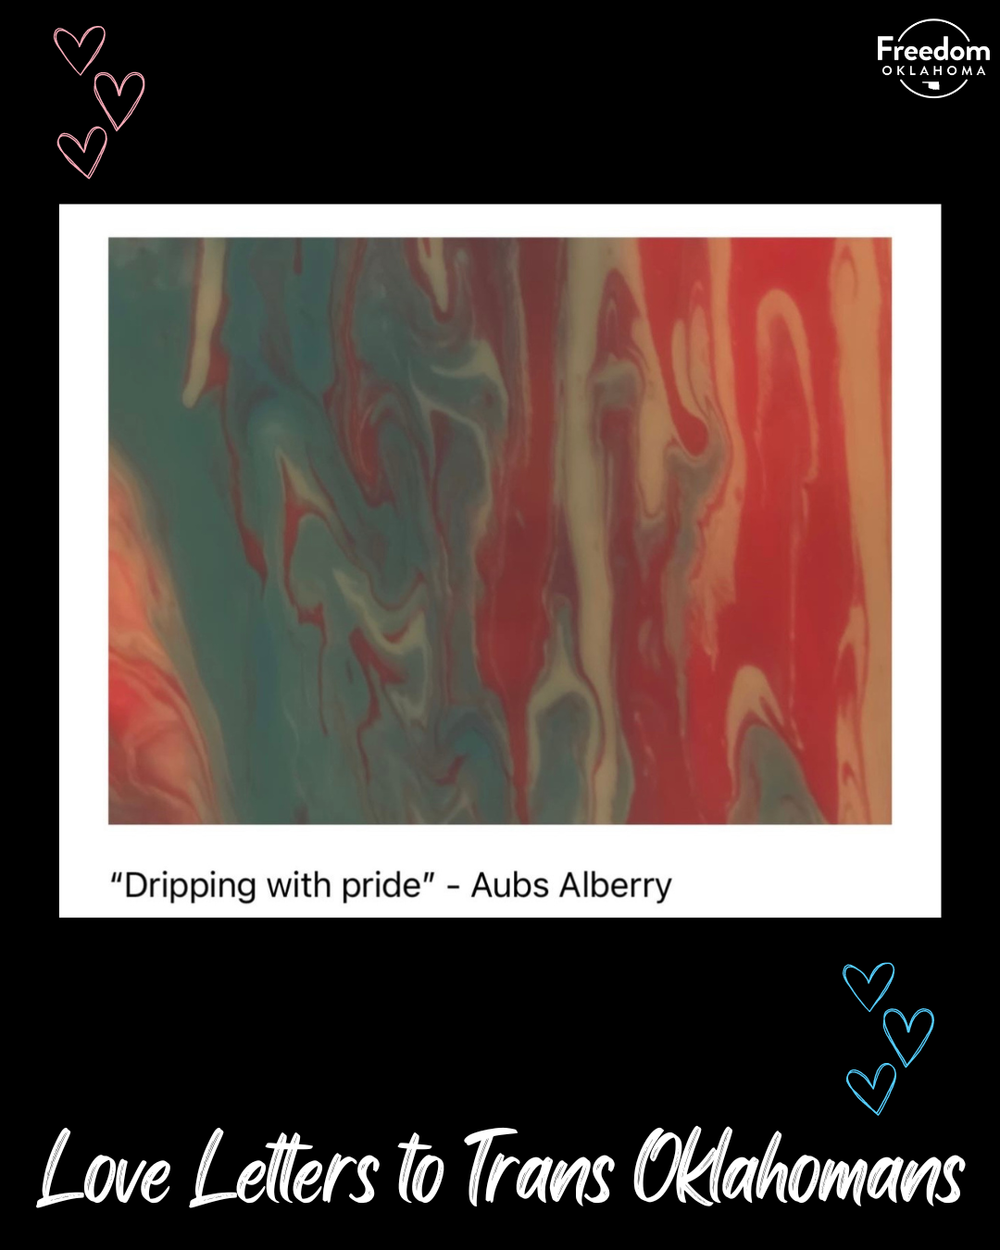  Black background with "Love Letters to Trans Oklahomans" at the bottom and in the center is the piece titled "Dripping with pride" by Aubs Alberry. Abstract painting that looks like wavy with equal parts dark pink/red and blue as the main focus with